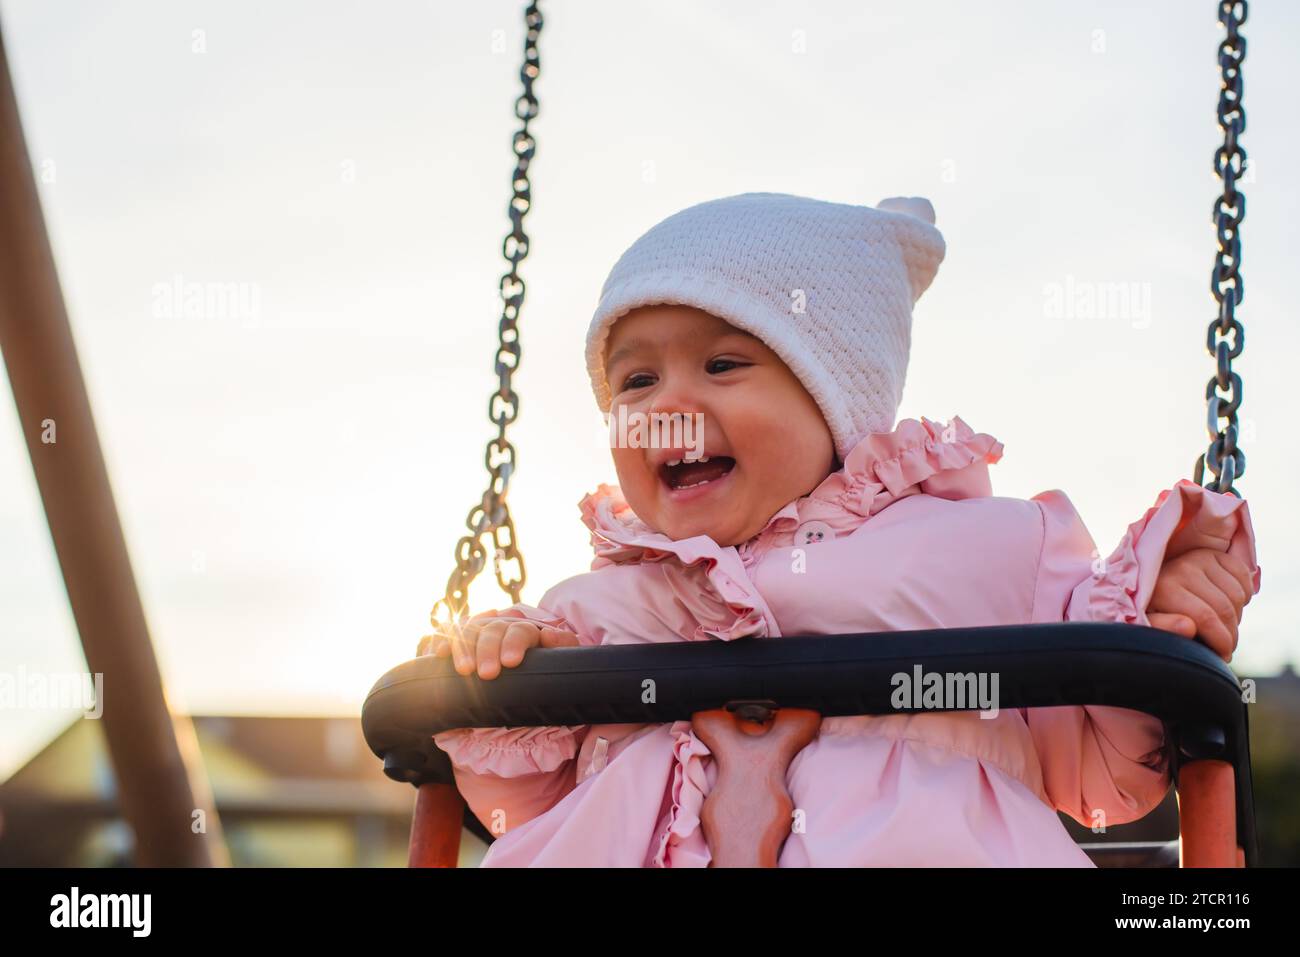 Adorable baby girl with big beautiful eyes and a beanie having fun on a swing ride at a playground in a sunny park Stock Photo